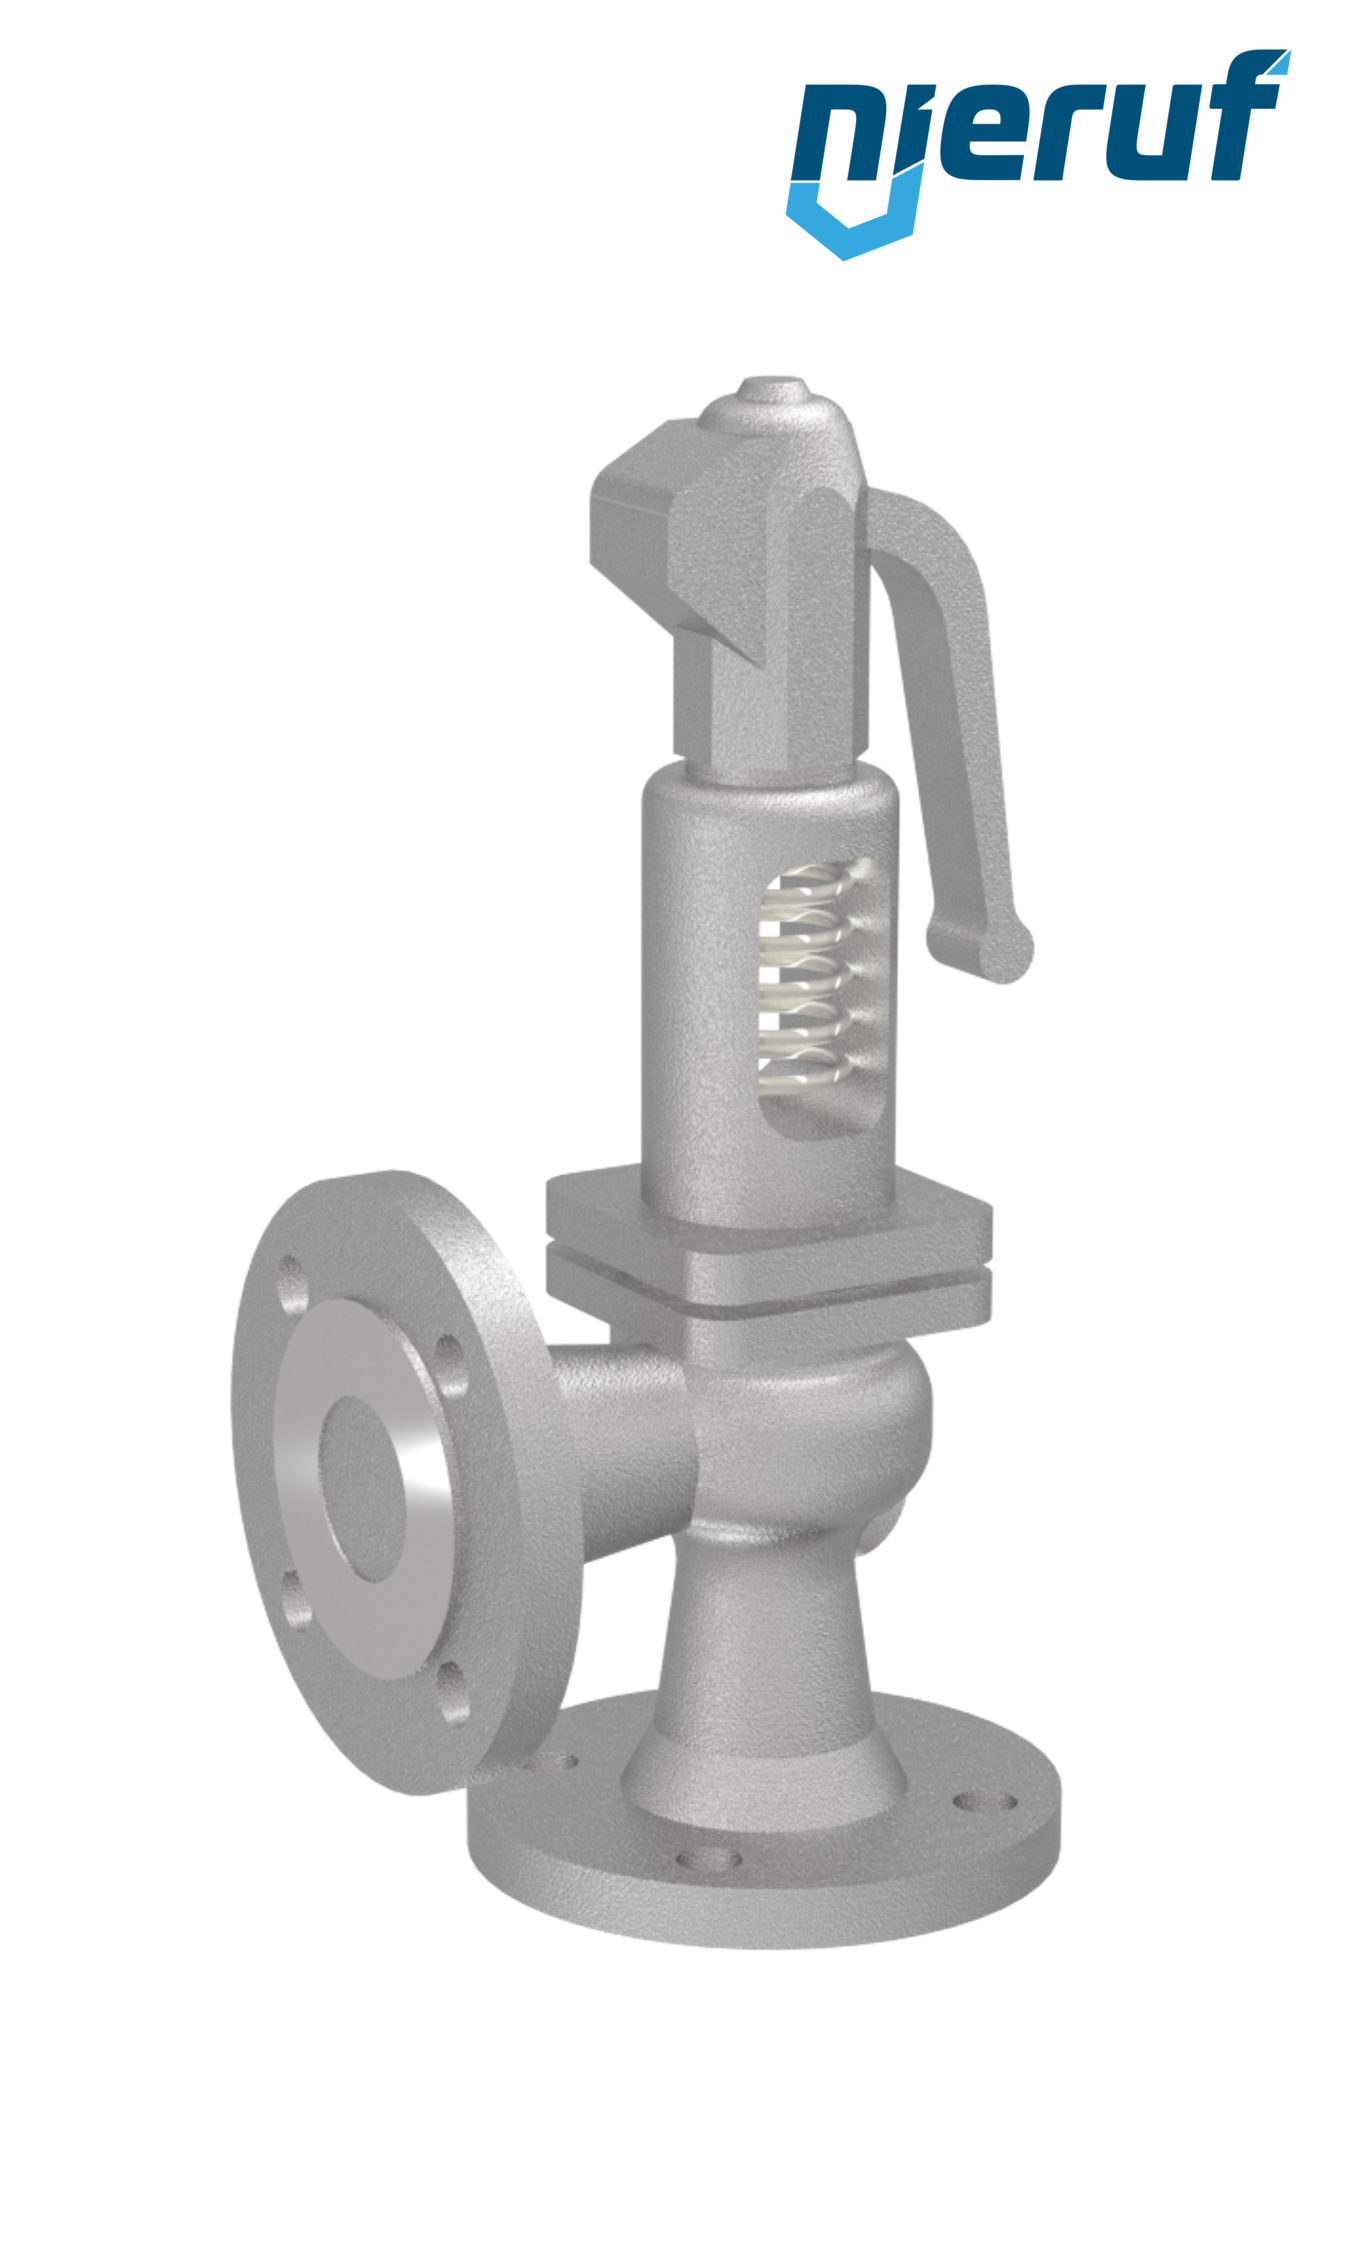 flange-safety valve DN100/DN100 SF0202, cast steel metal, with lever